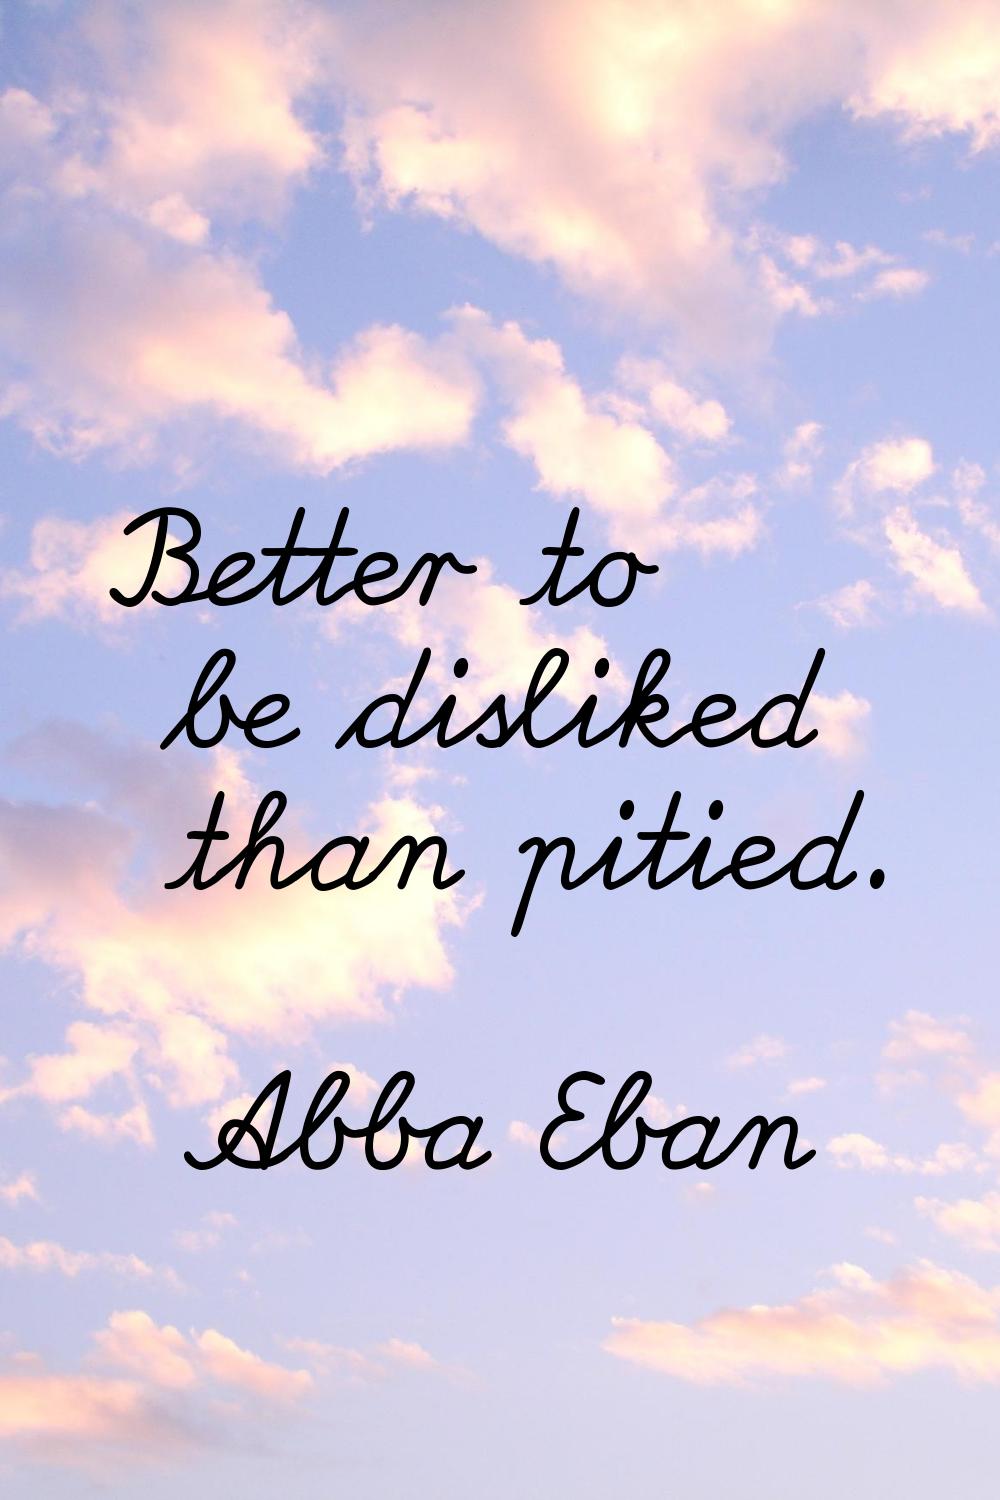 Better to be disliked than pitied.